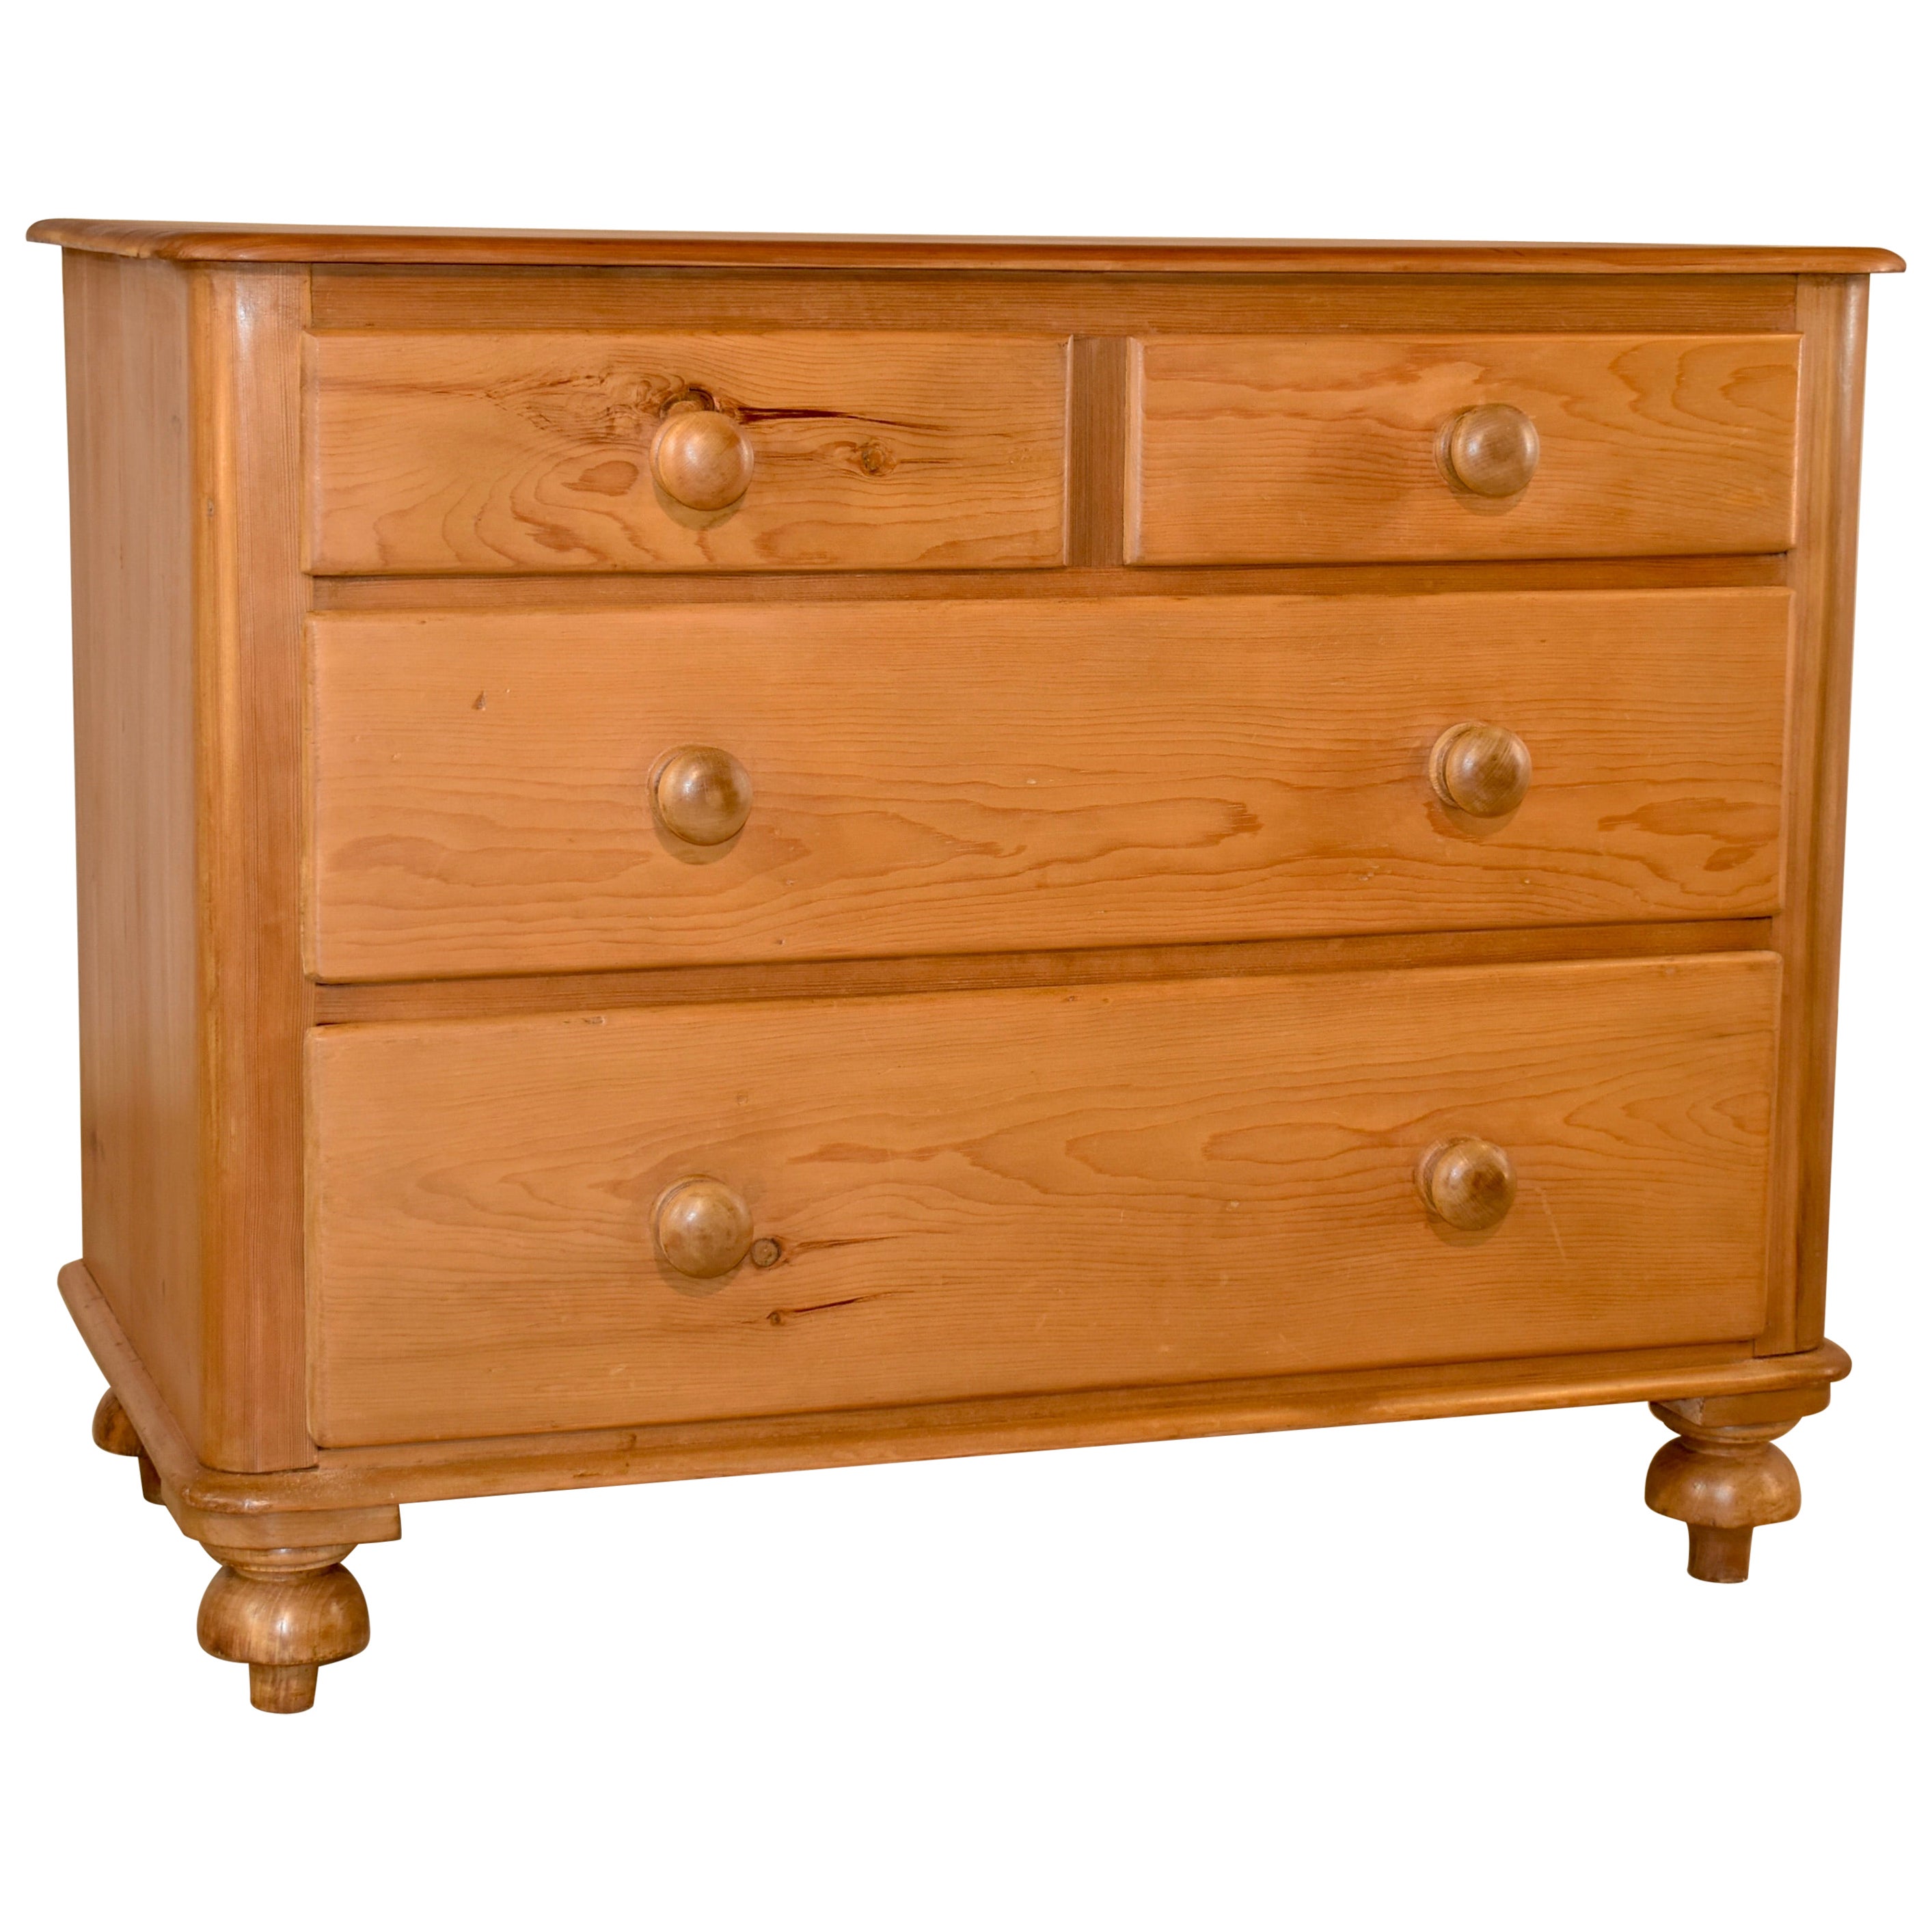 19th Century English Pine Chest of Drawers For Sale